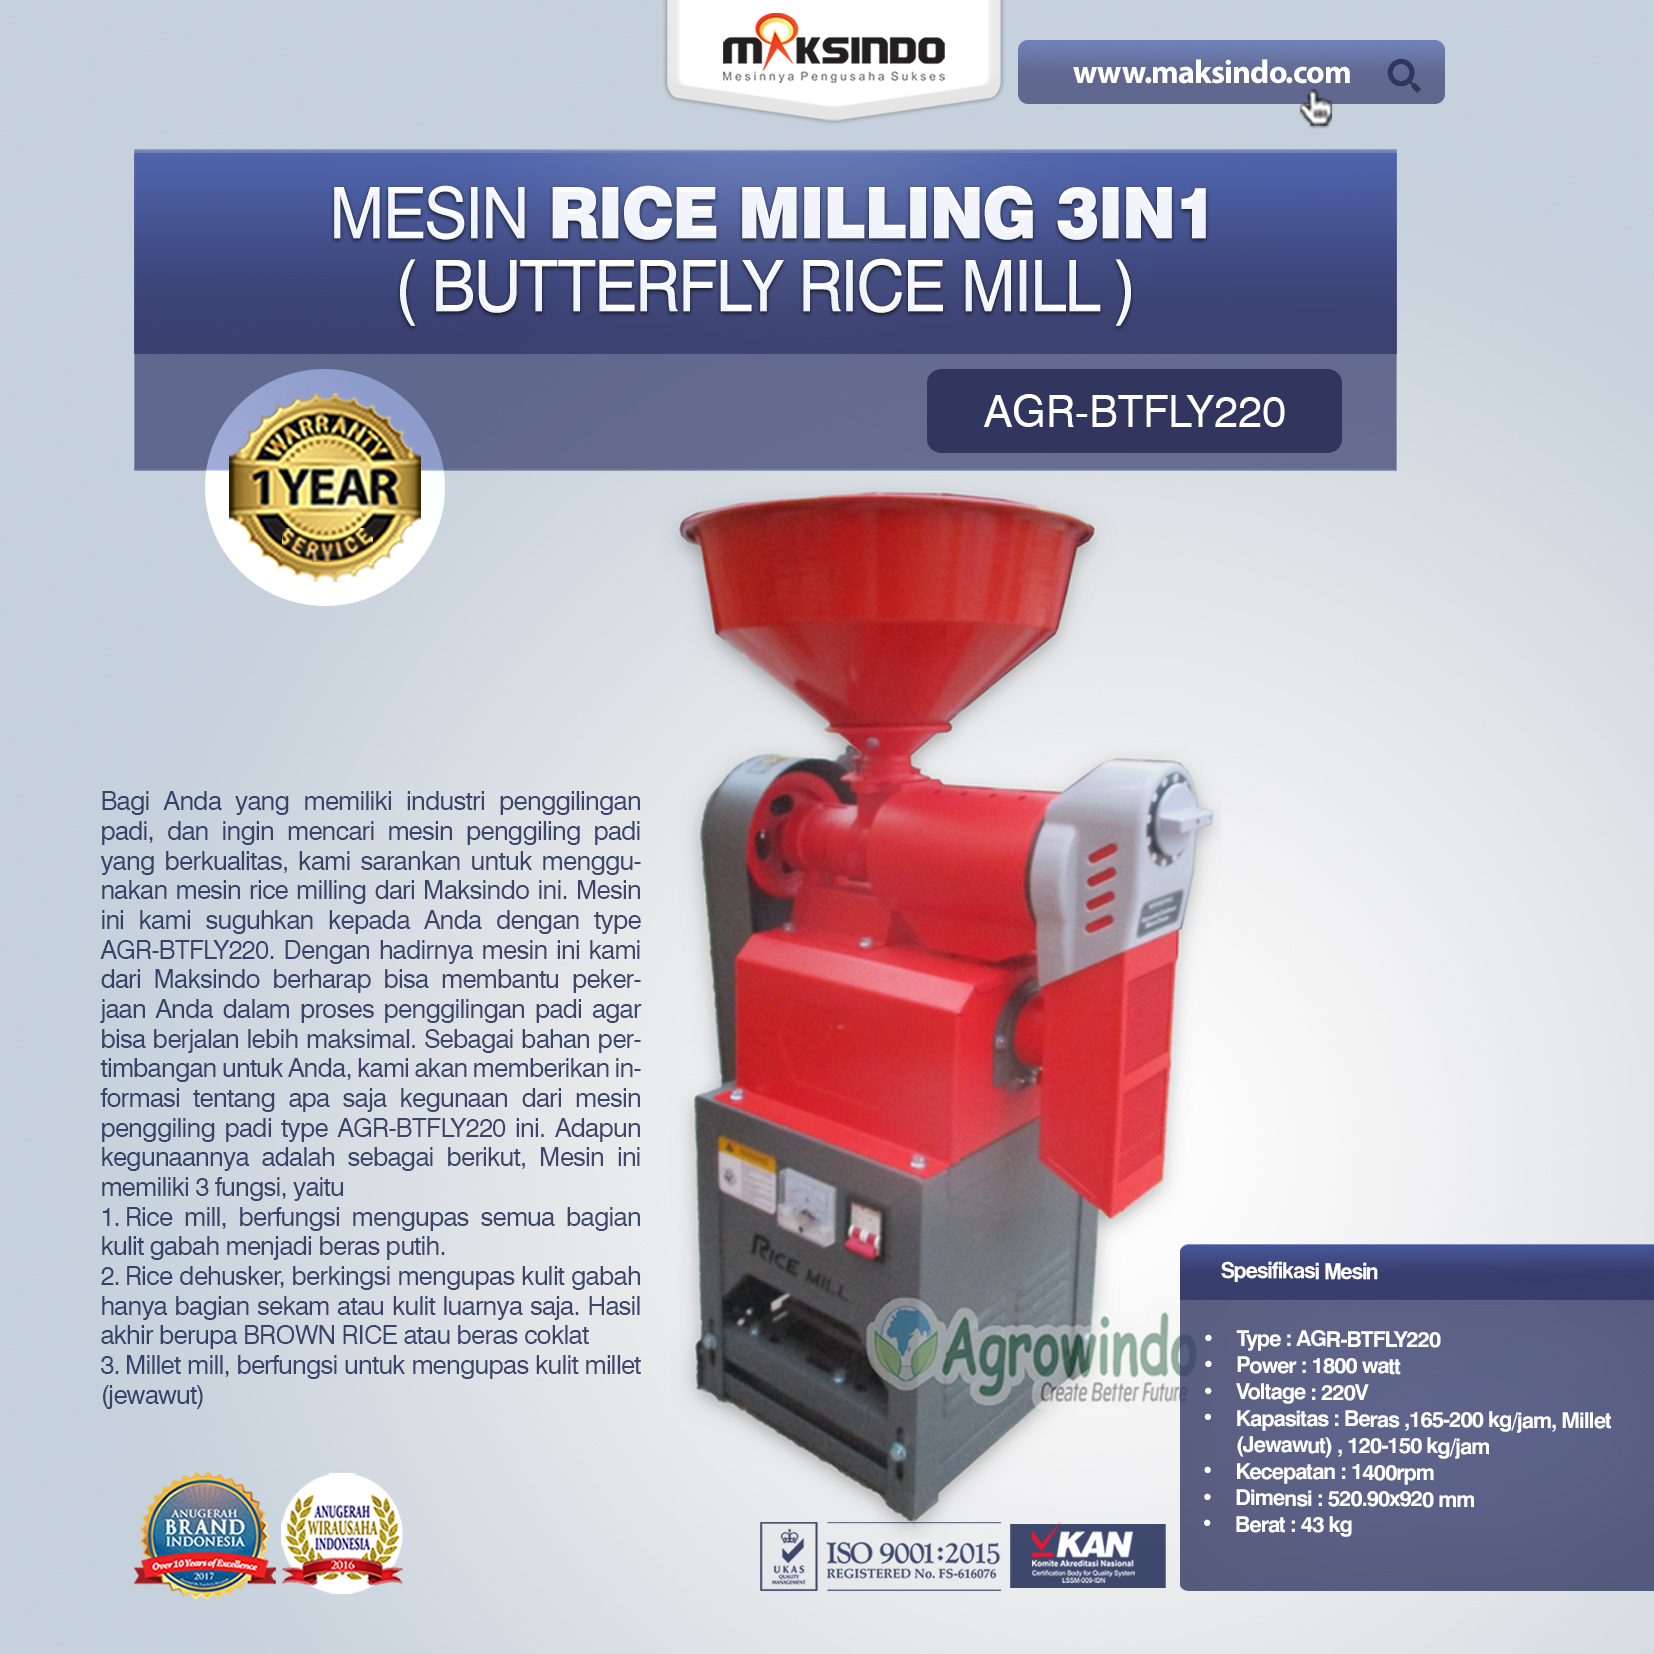 Jual Mesin Rice Milling 3in1 (Butterfly Rice Mill) AGR-BTFLY220 di Malang